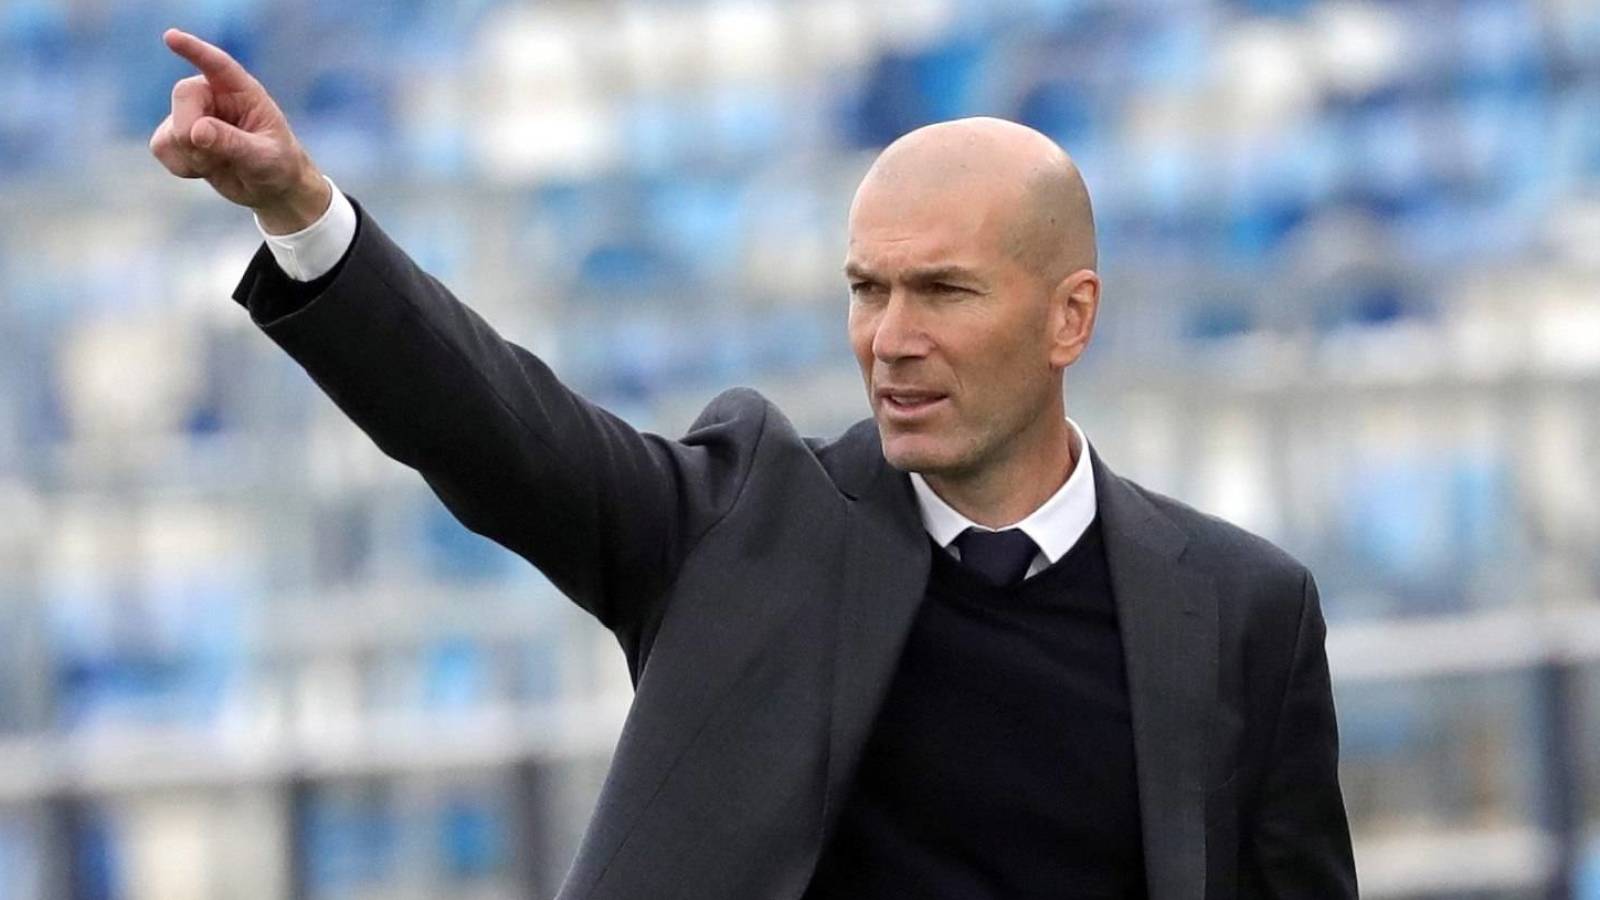 Zidane close to joining PSG as coach: reports